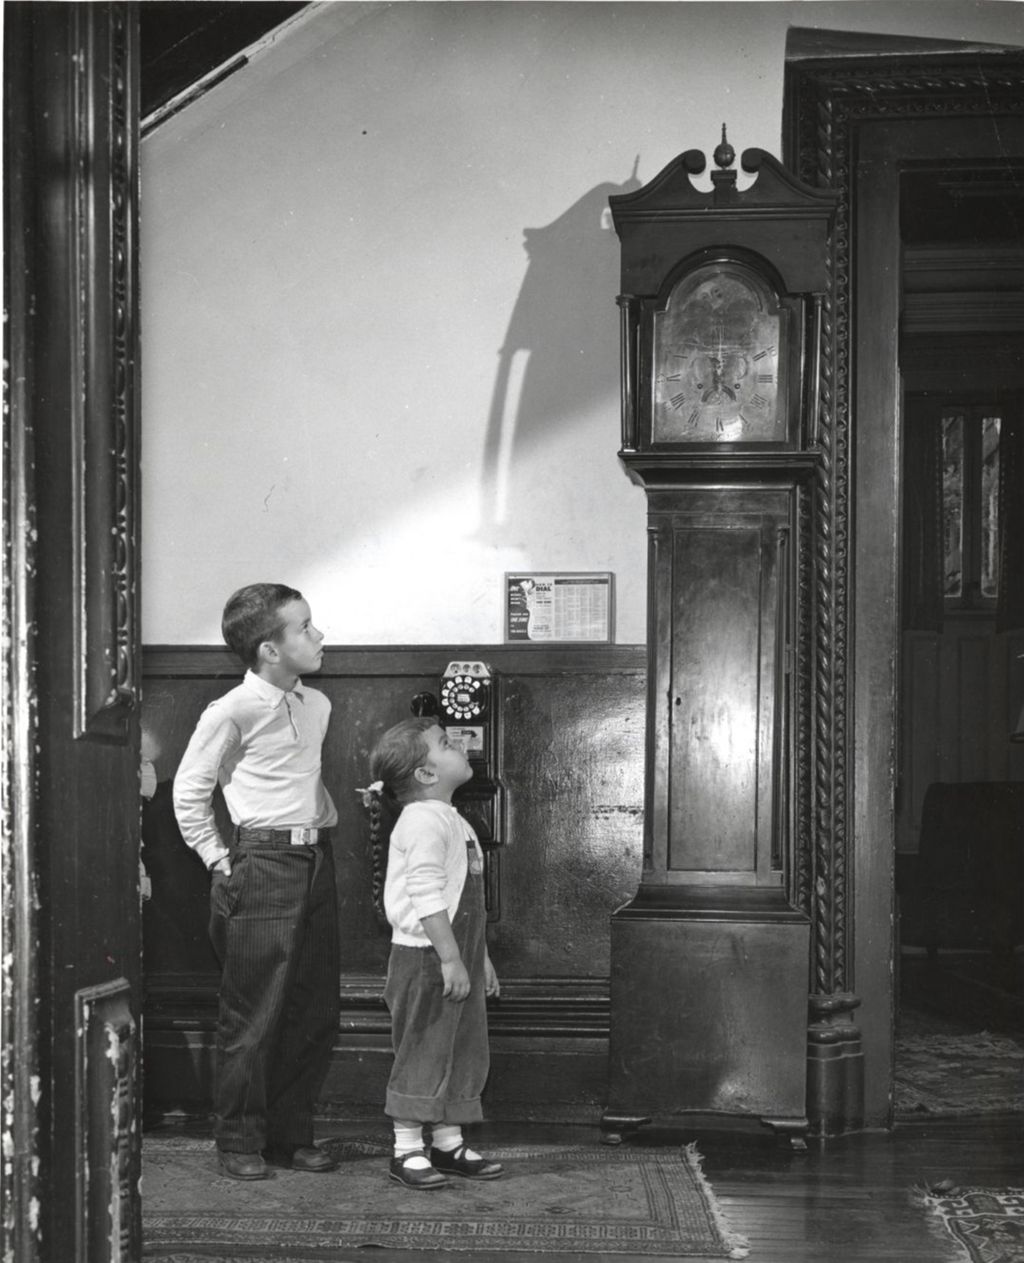 Miniature of Boy and girl looking up at grandfather clock